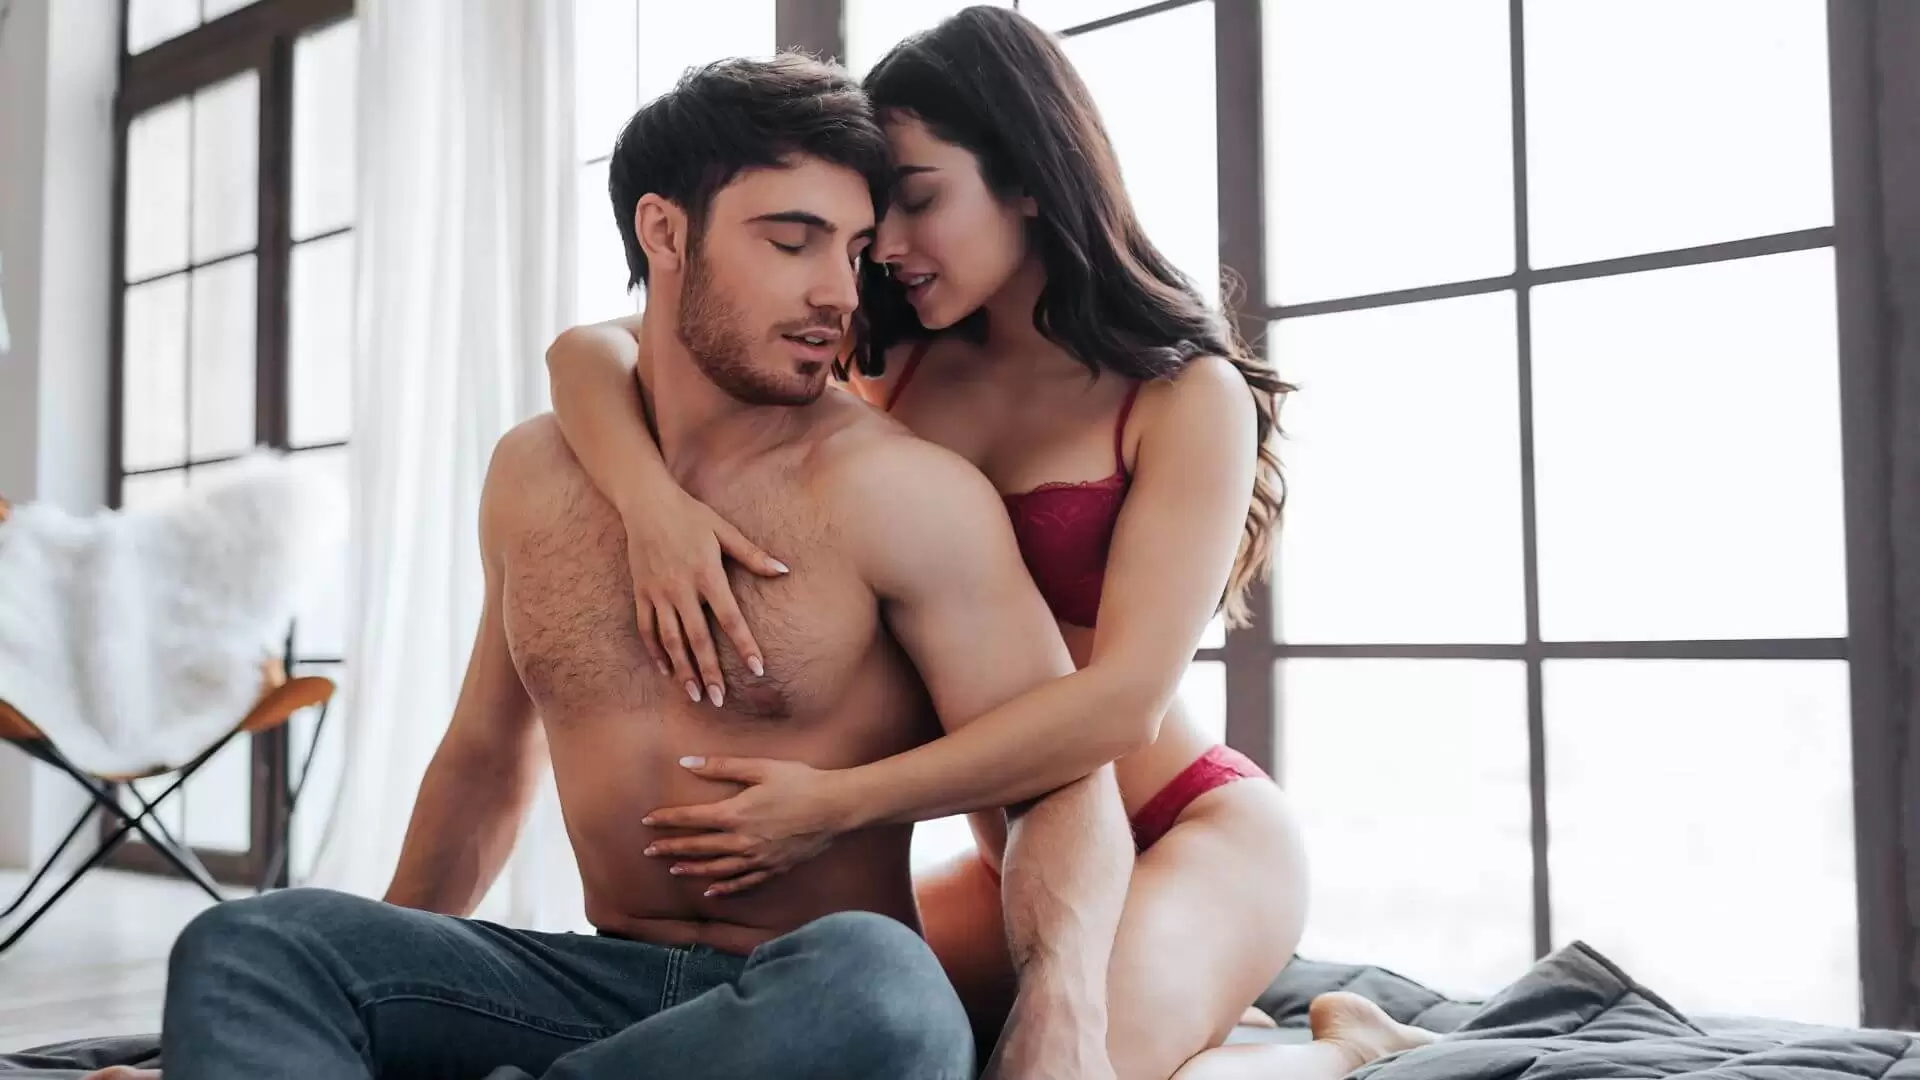 5 MISTAKES THAT ARE KILLING YOUR ENJOYMENT OF SEX AND RELATIONSHIPS (1)